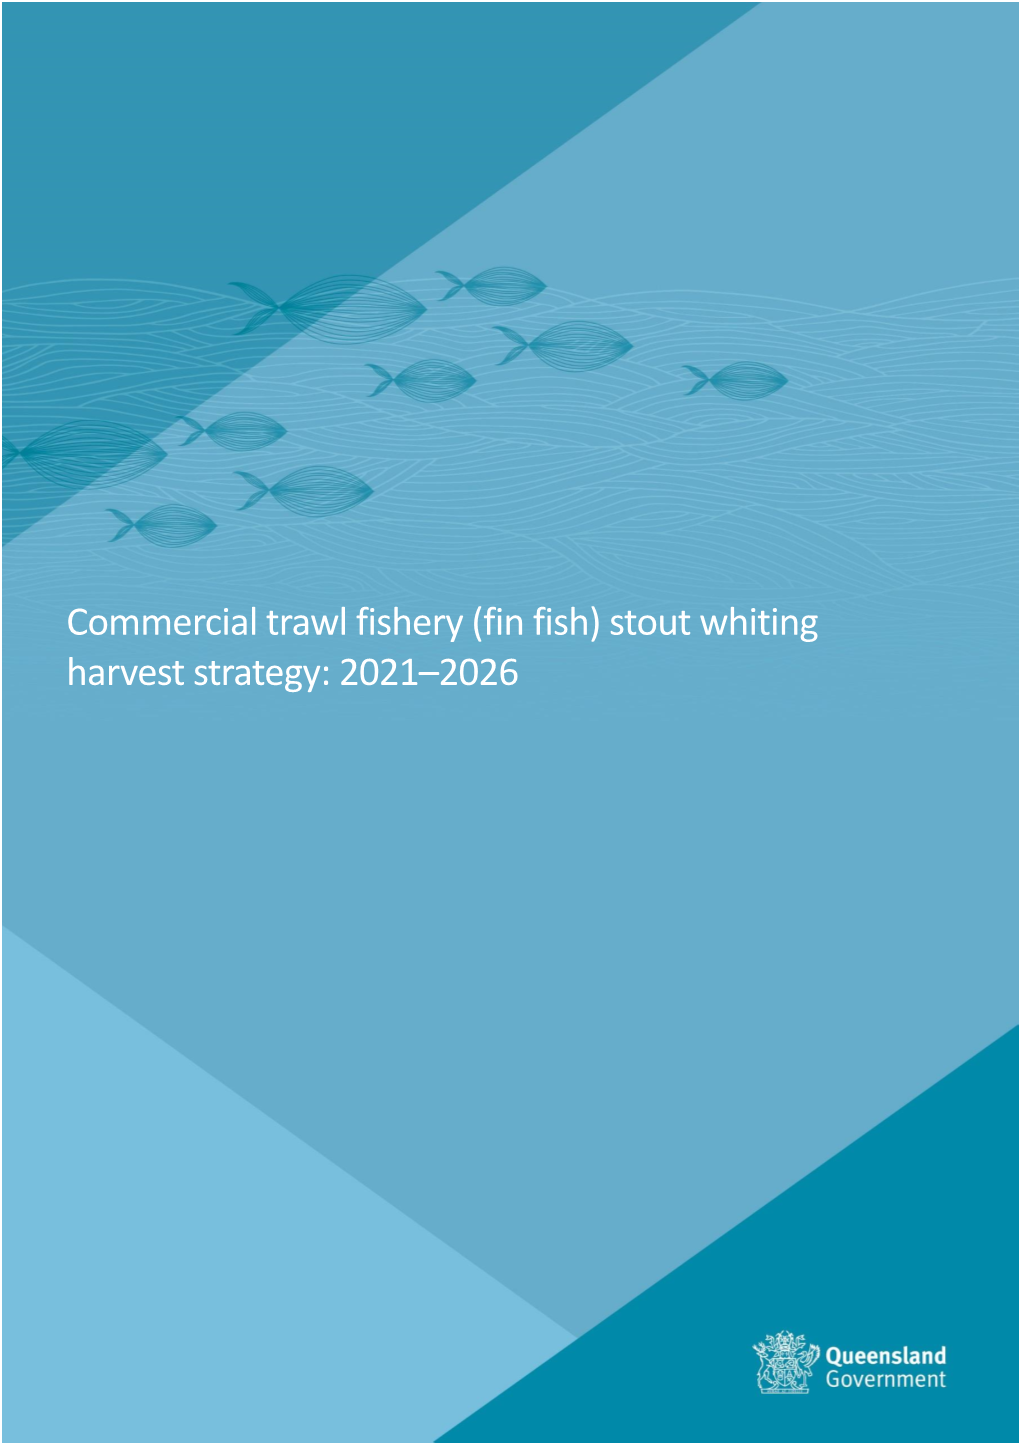 Fin Fish Trawl (Stout Whiting) Fishery Harvest Strategy